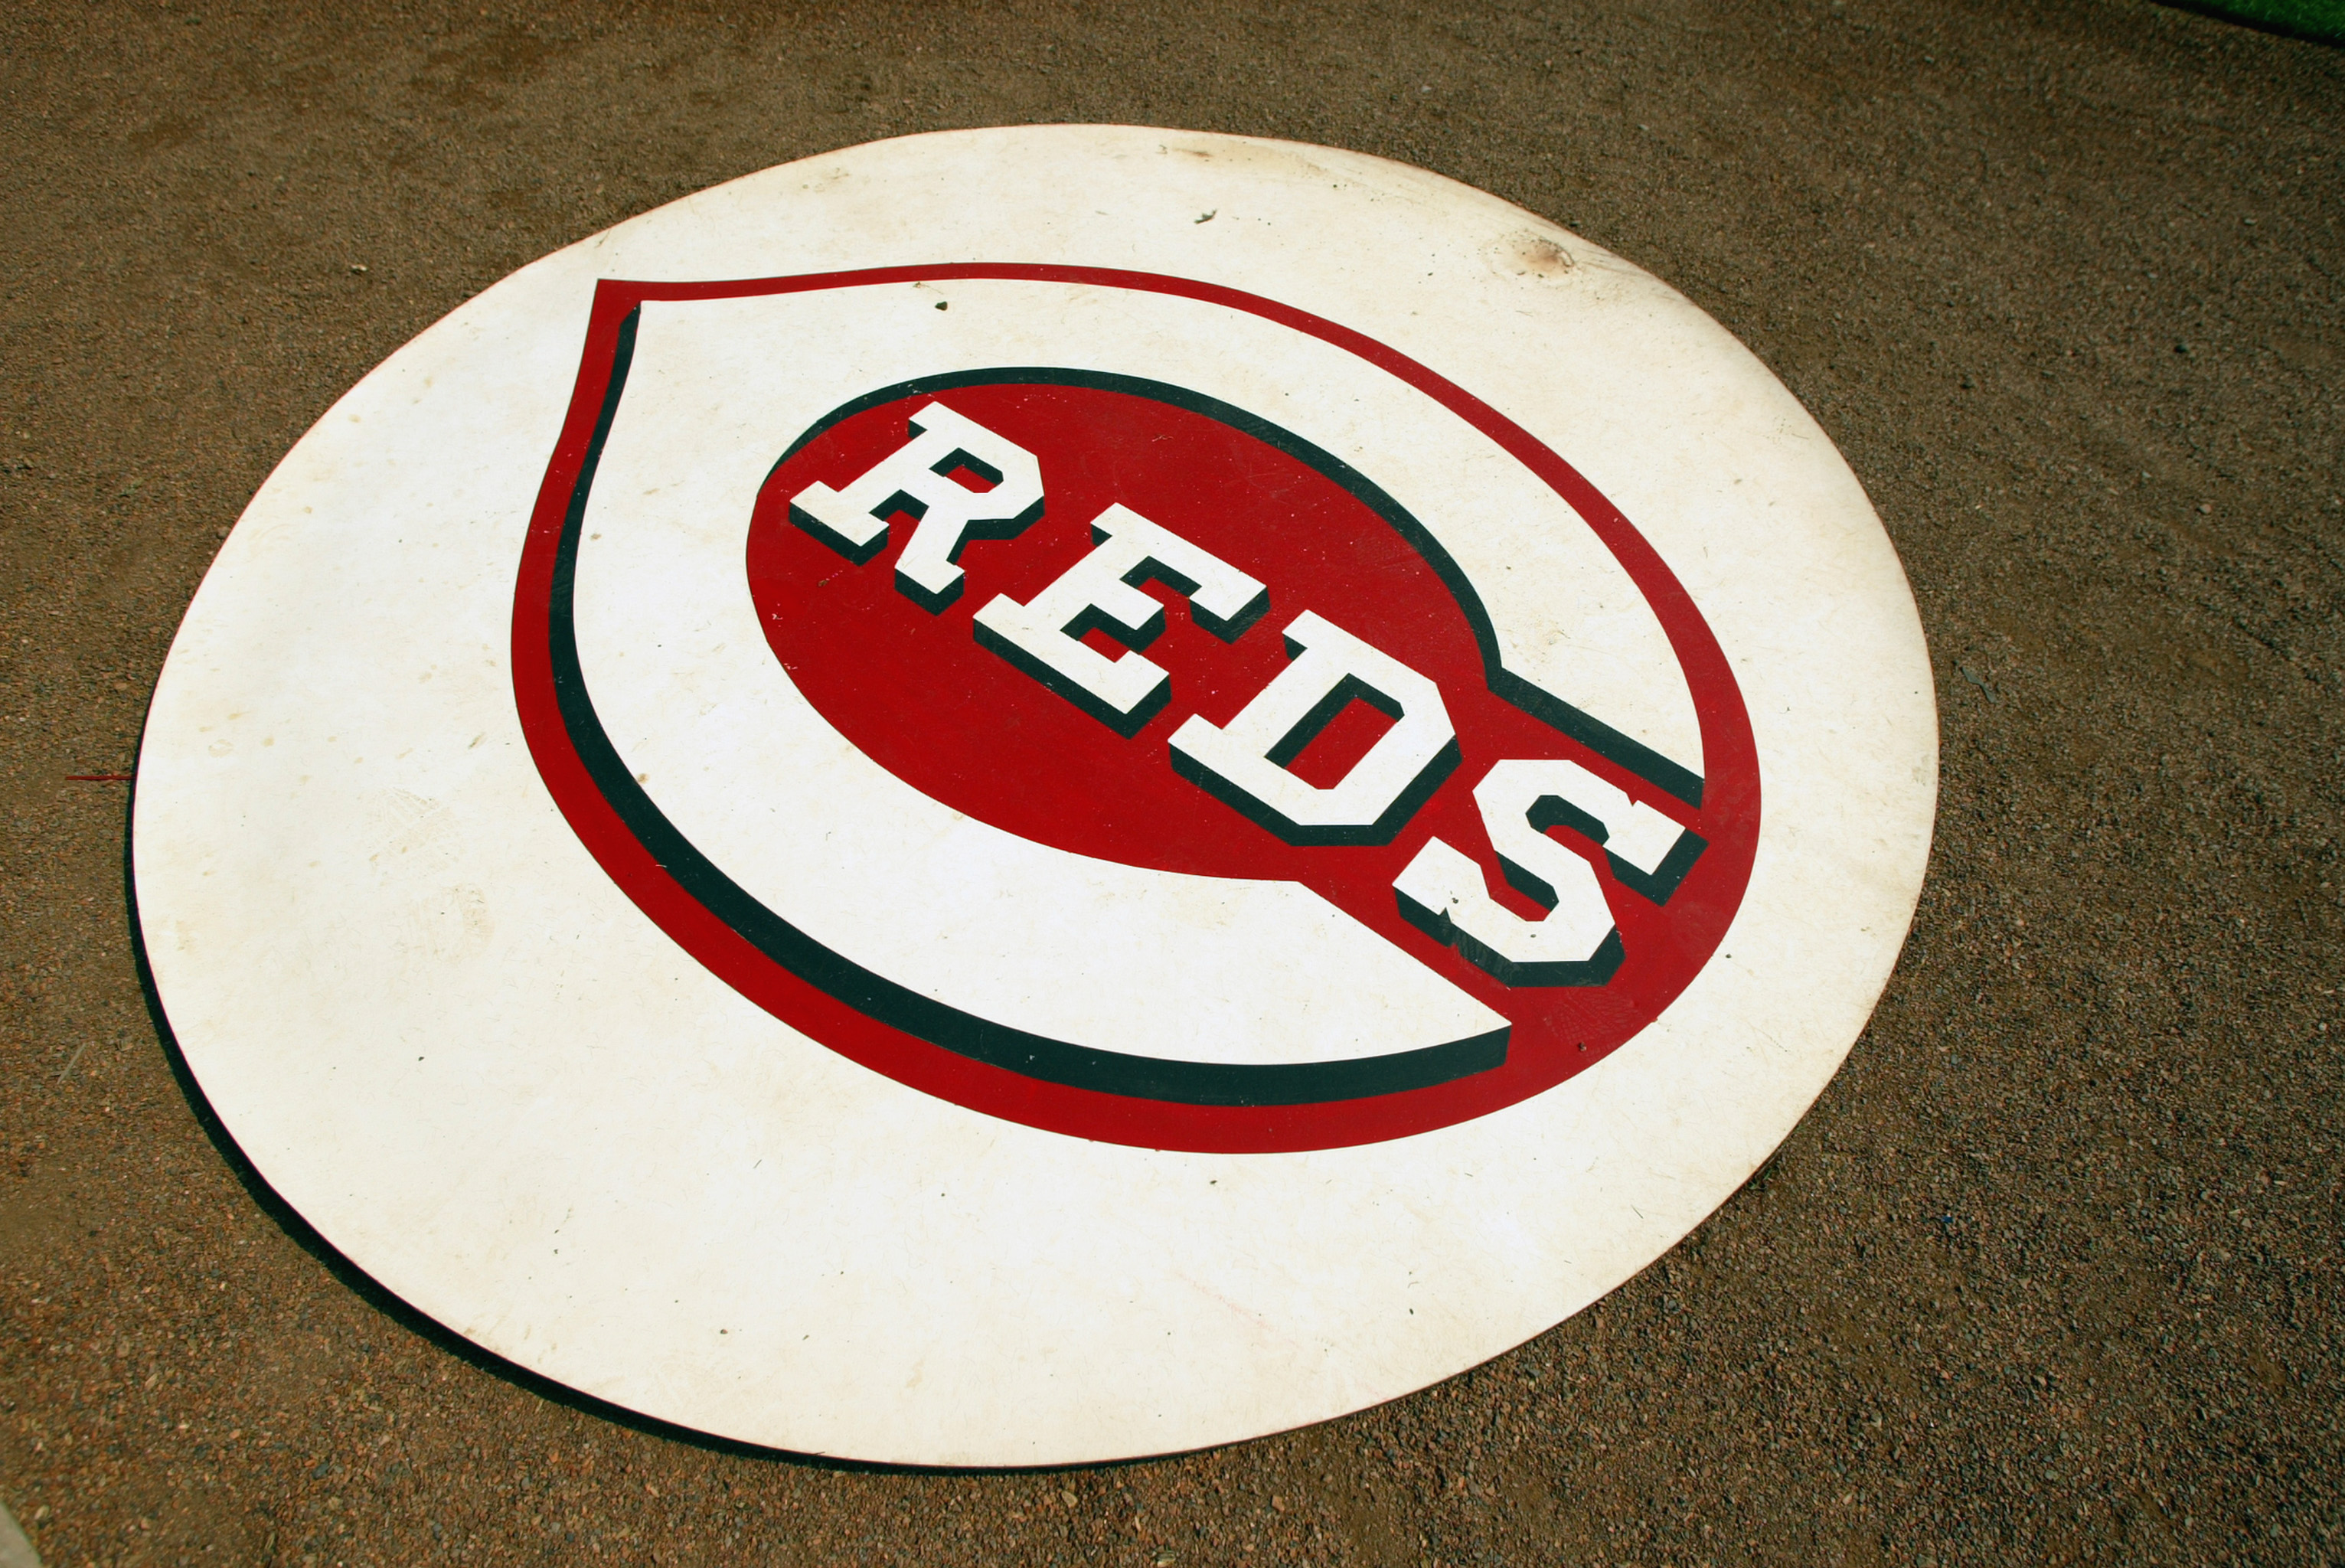 CINCINNATI, OH - SEPTEMBER 11:  Detailed shot of the Cincinnati Reds logo during the game against the Pittsburgh Pirates at Great American Ball Park on September 11, 2003  in Cincinnati, Ohio.  The Reds defeated the Pirates 3-2. (Photo by Andy Lyons/Getty